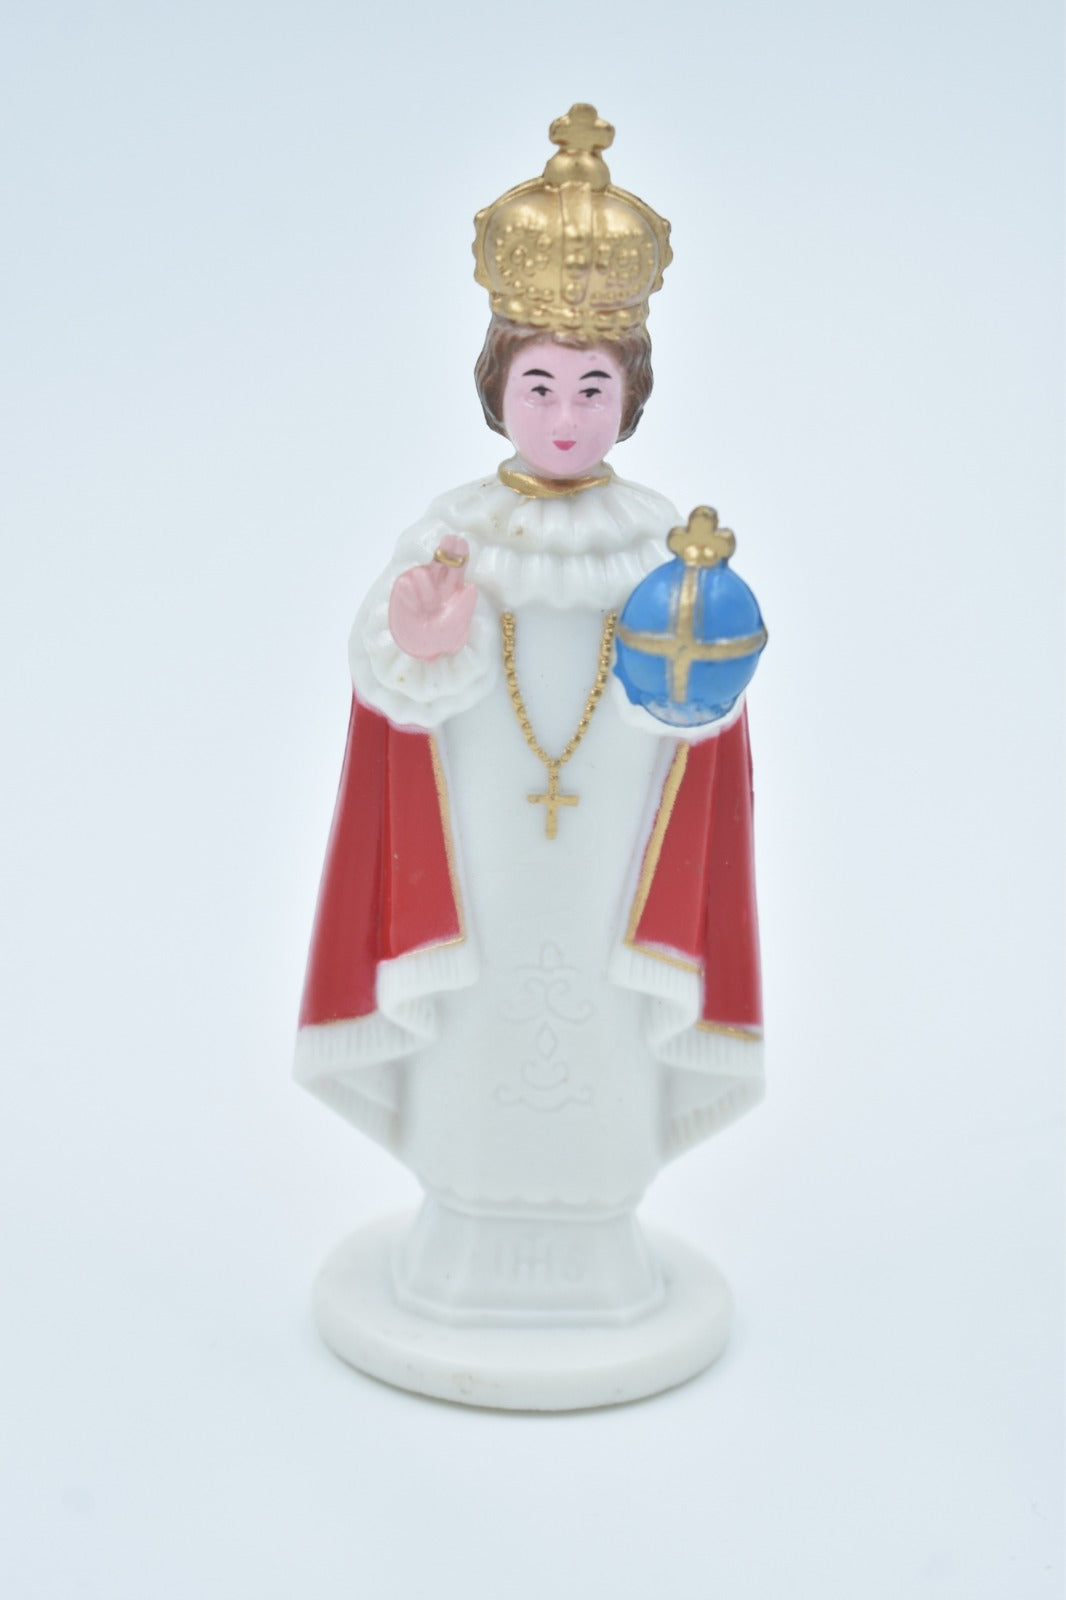 Infant Jesus 3 Inch Car Statue - Handcrafted to Bless and Protect Your Journeys